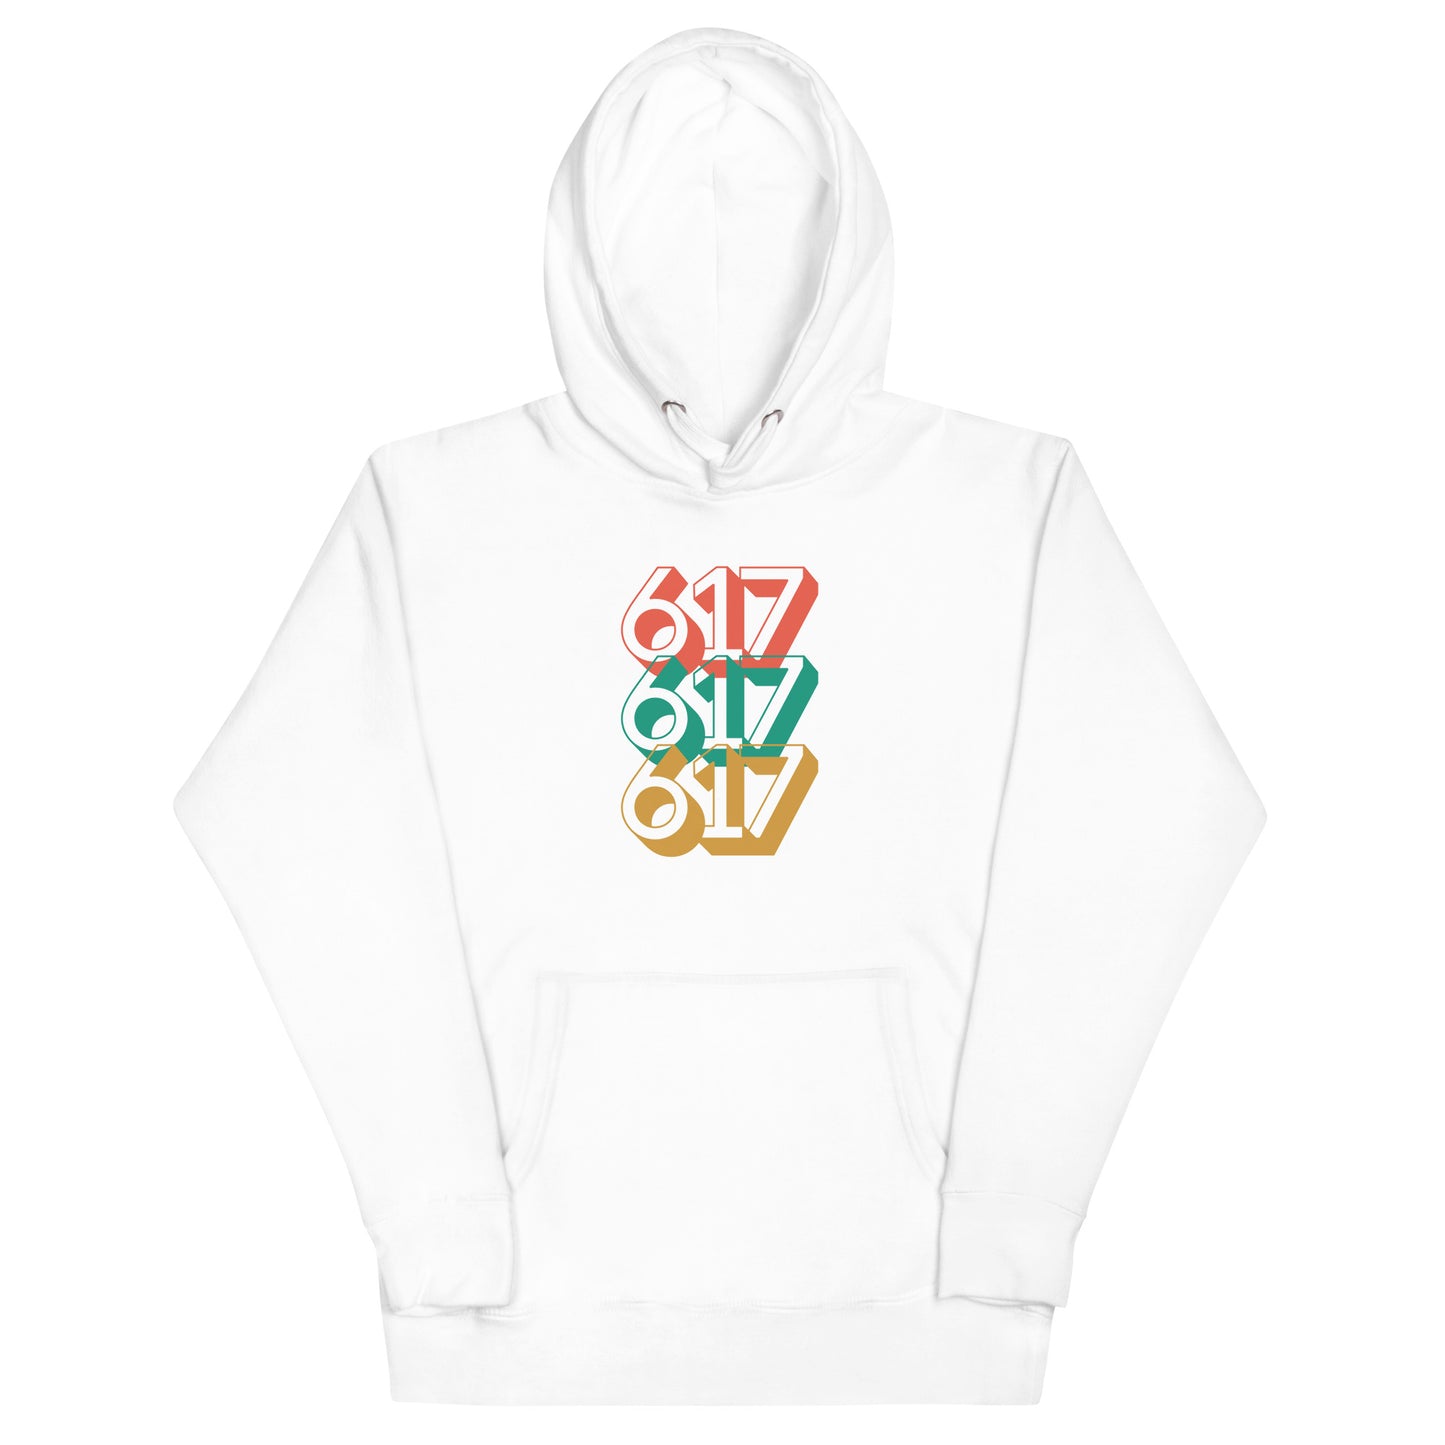 white hoodie with three 617s in red green and yellow